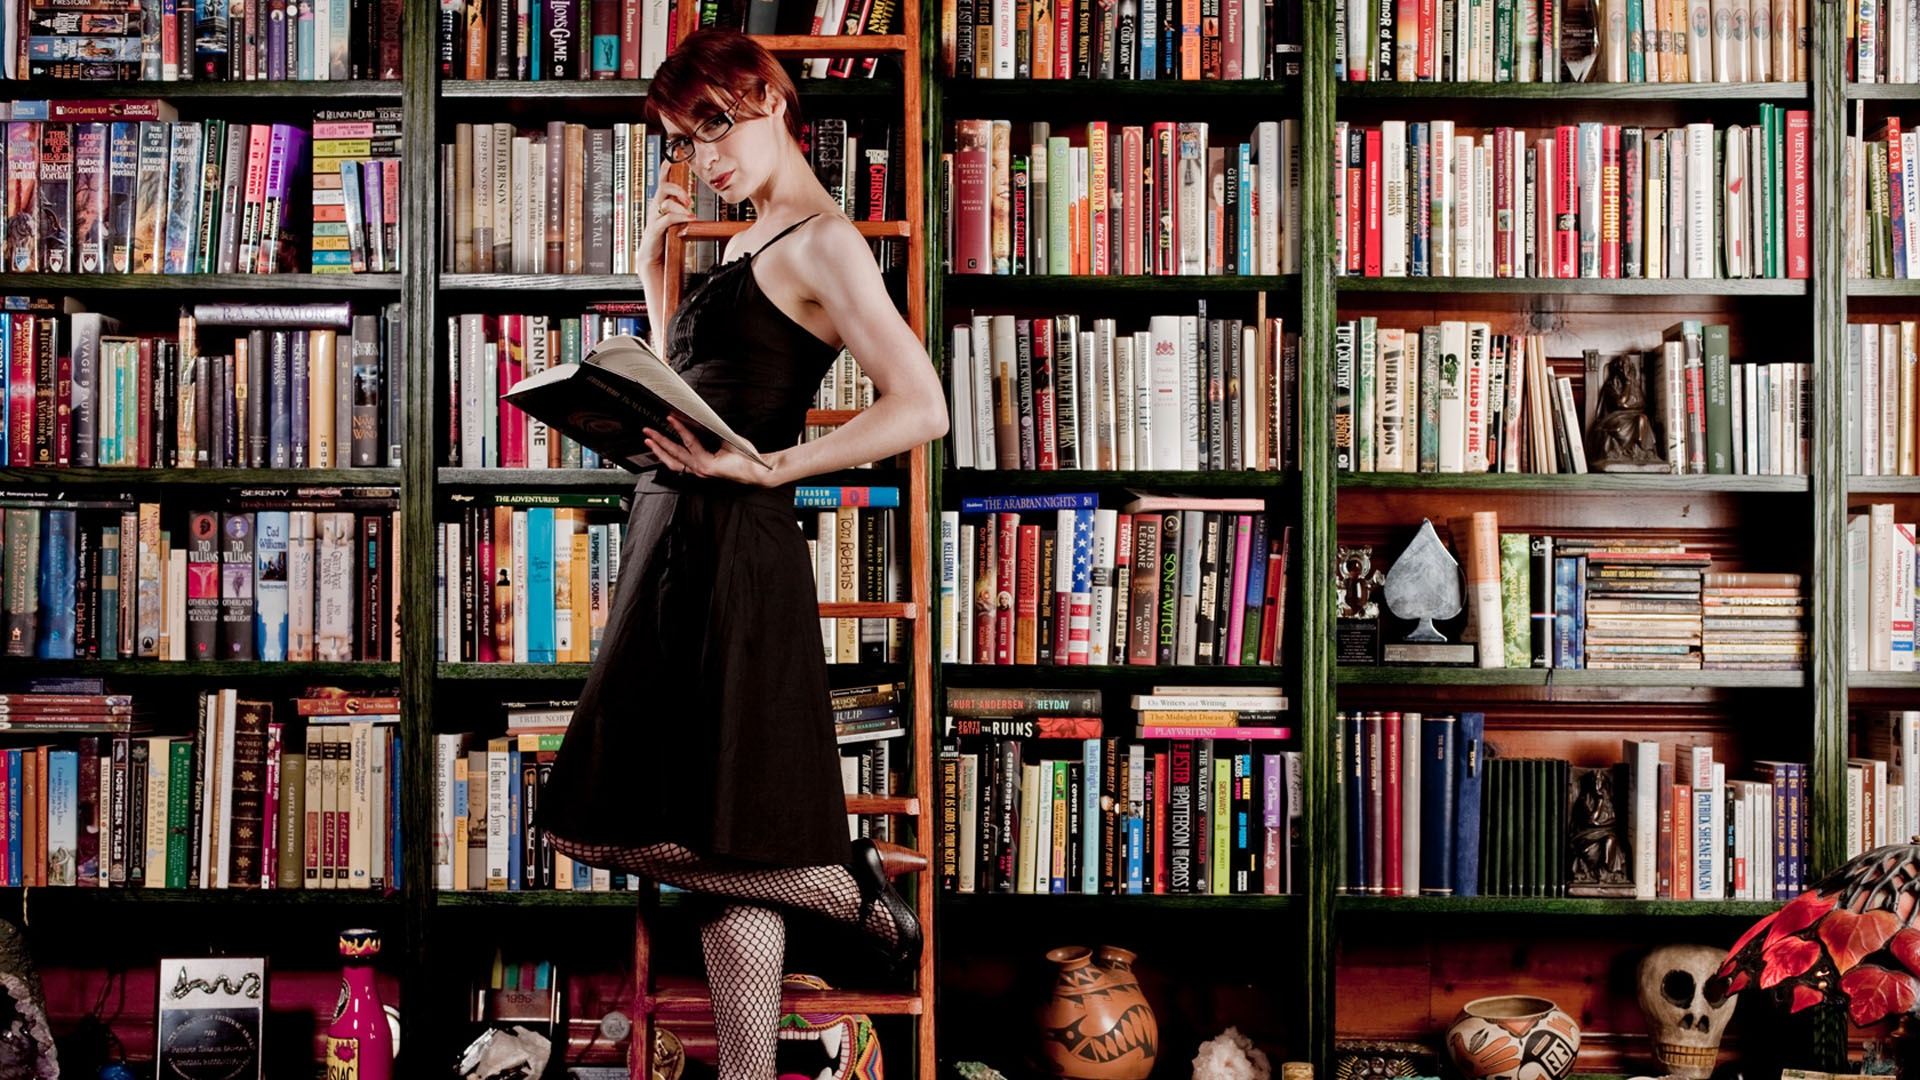 748 Image1 Bibliodeviant Felicia Day - Felicia Day Wallpaper Iphone , HD Wallpaper & Backgrounds